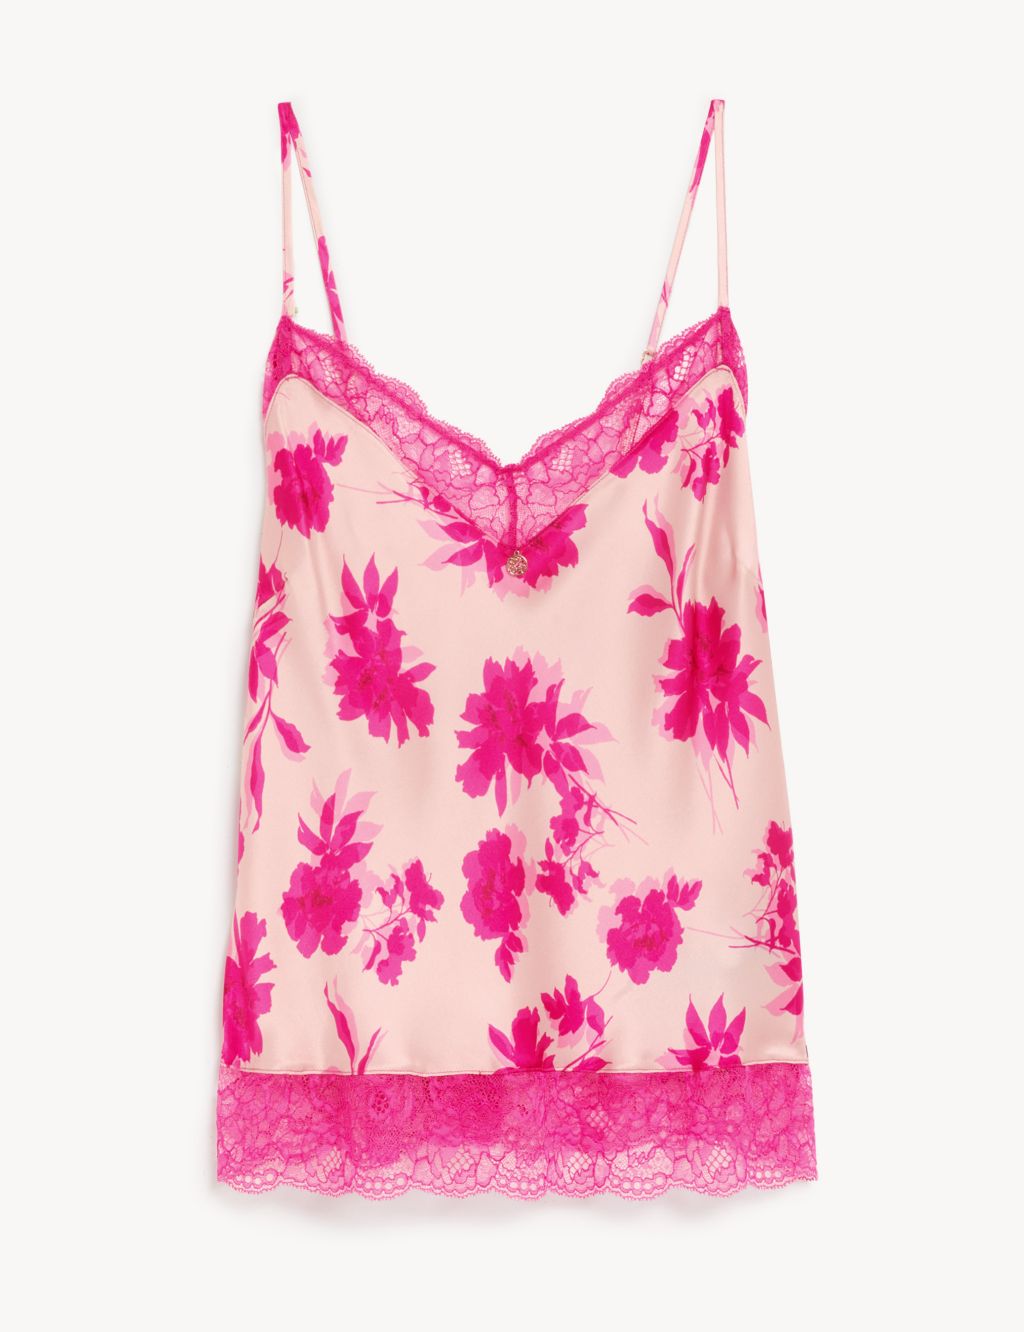 Laylani Silk & Lace Floral Cami image 2